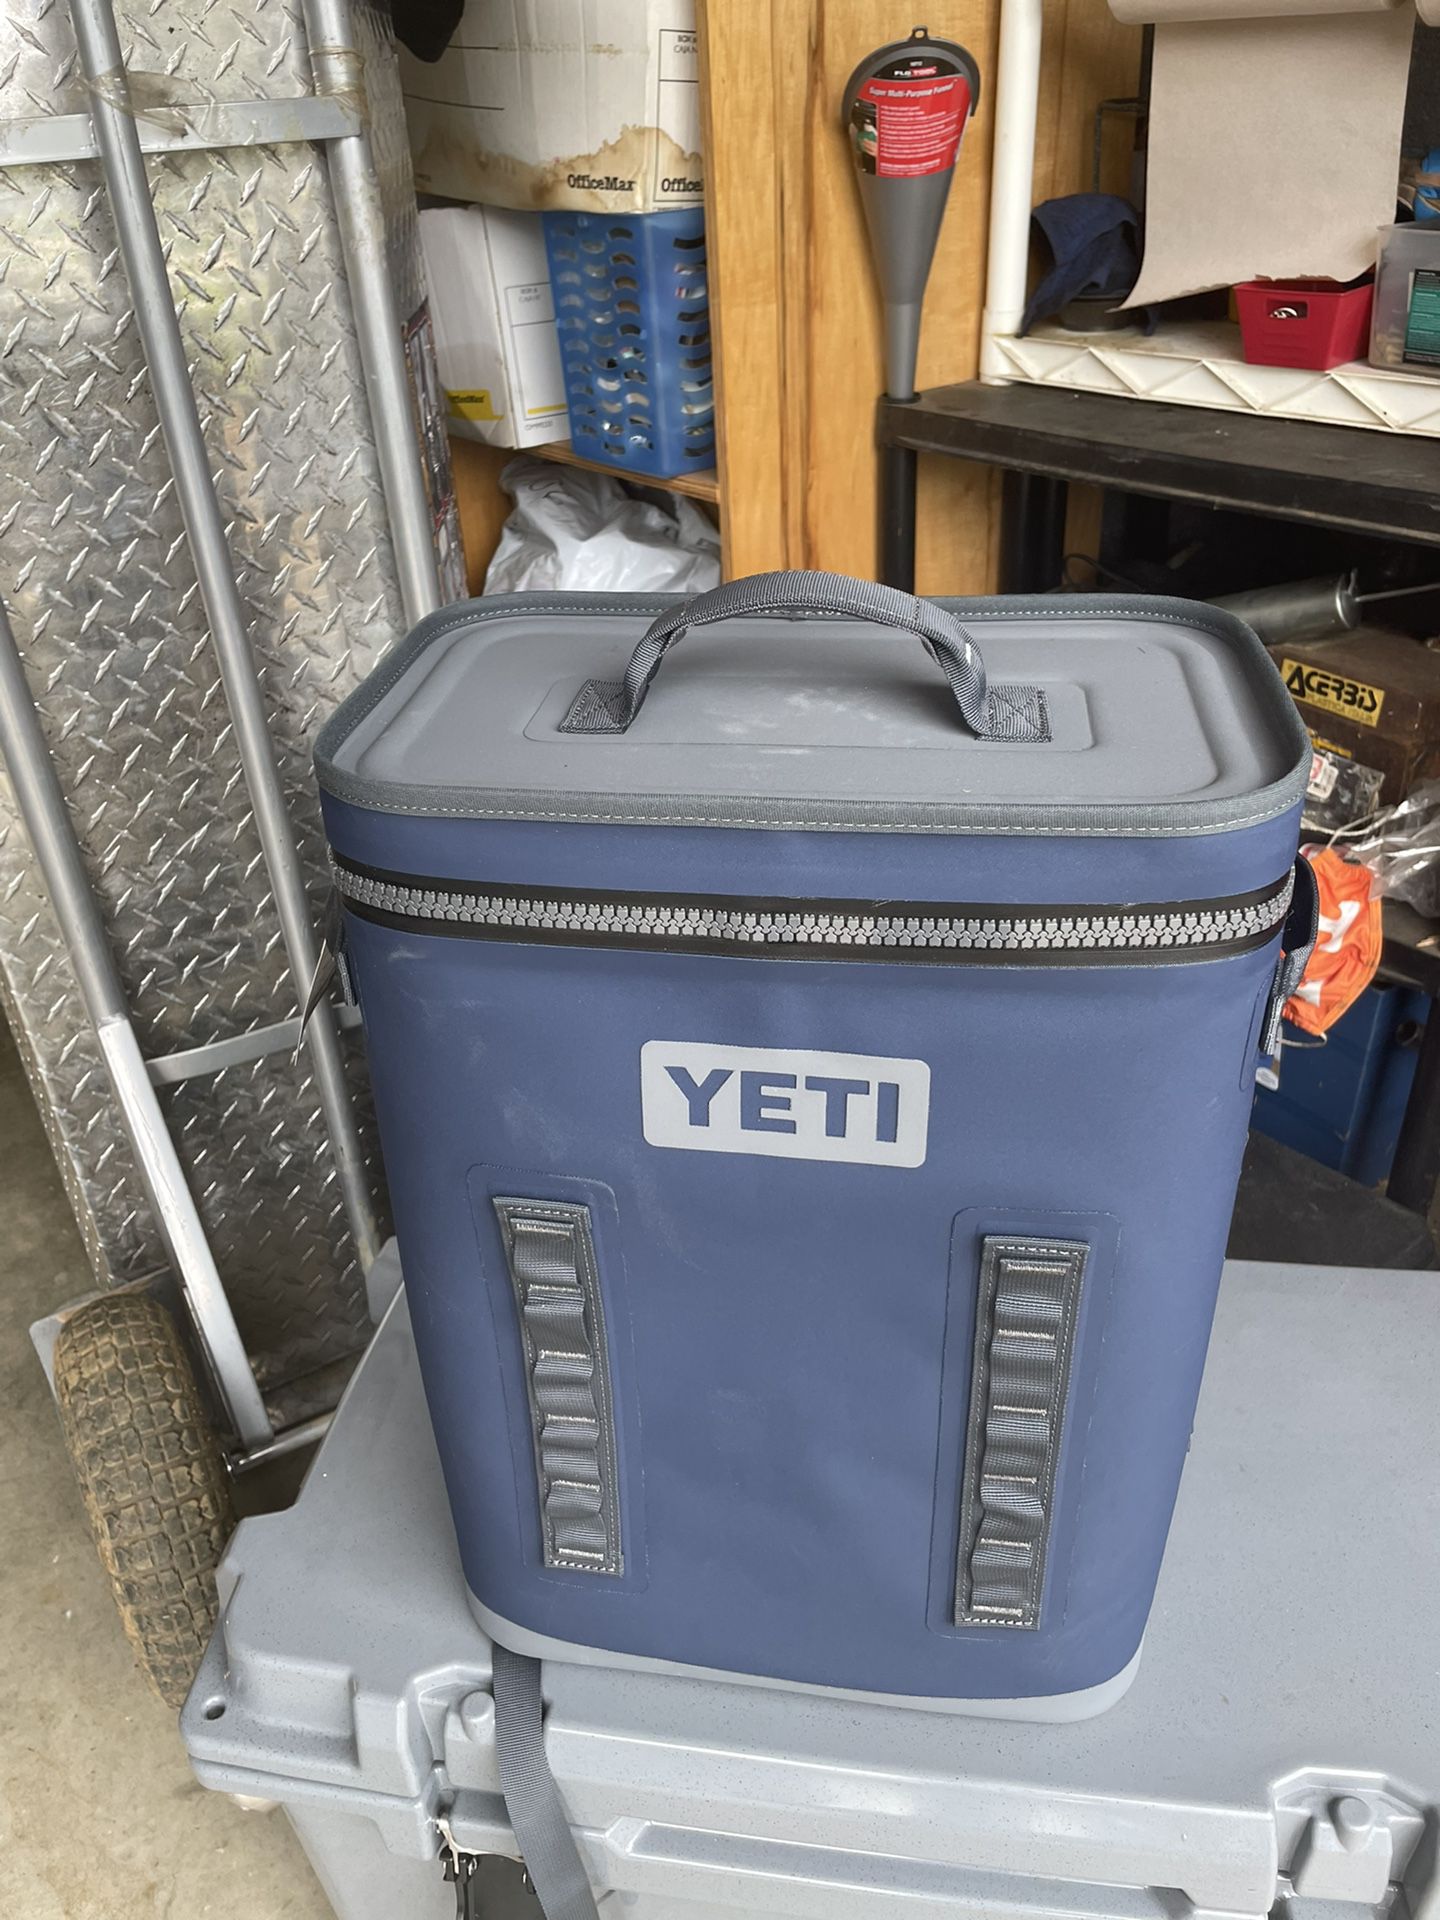 New and used YETI Backpack Coolers for sale